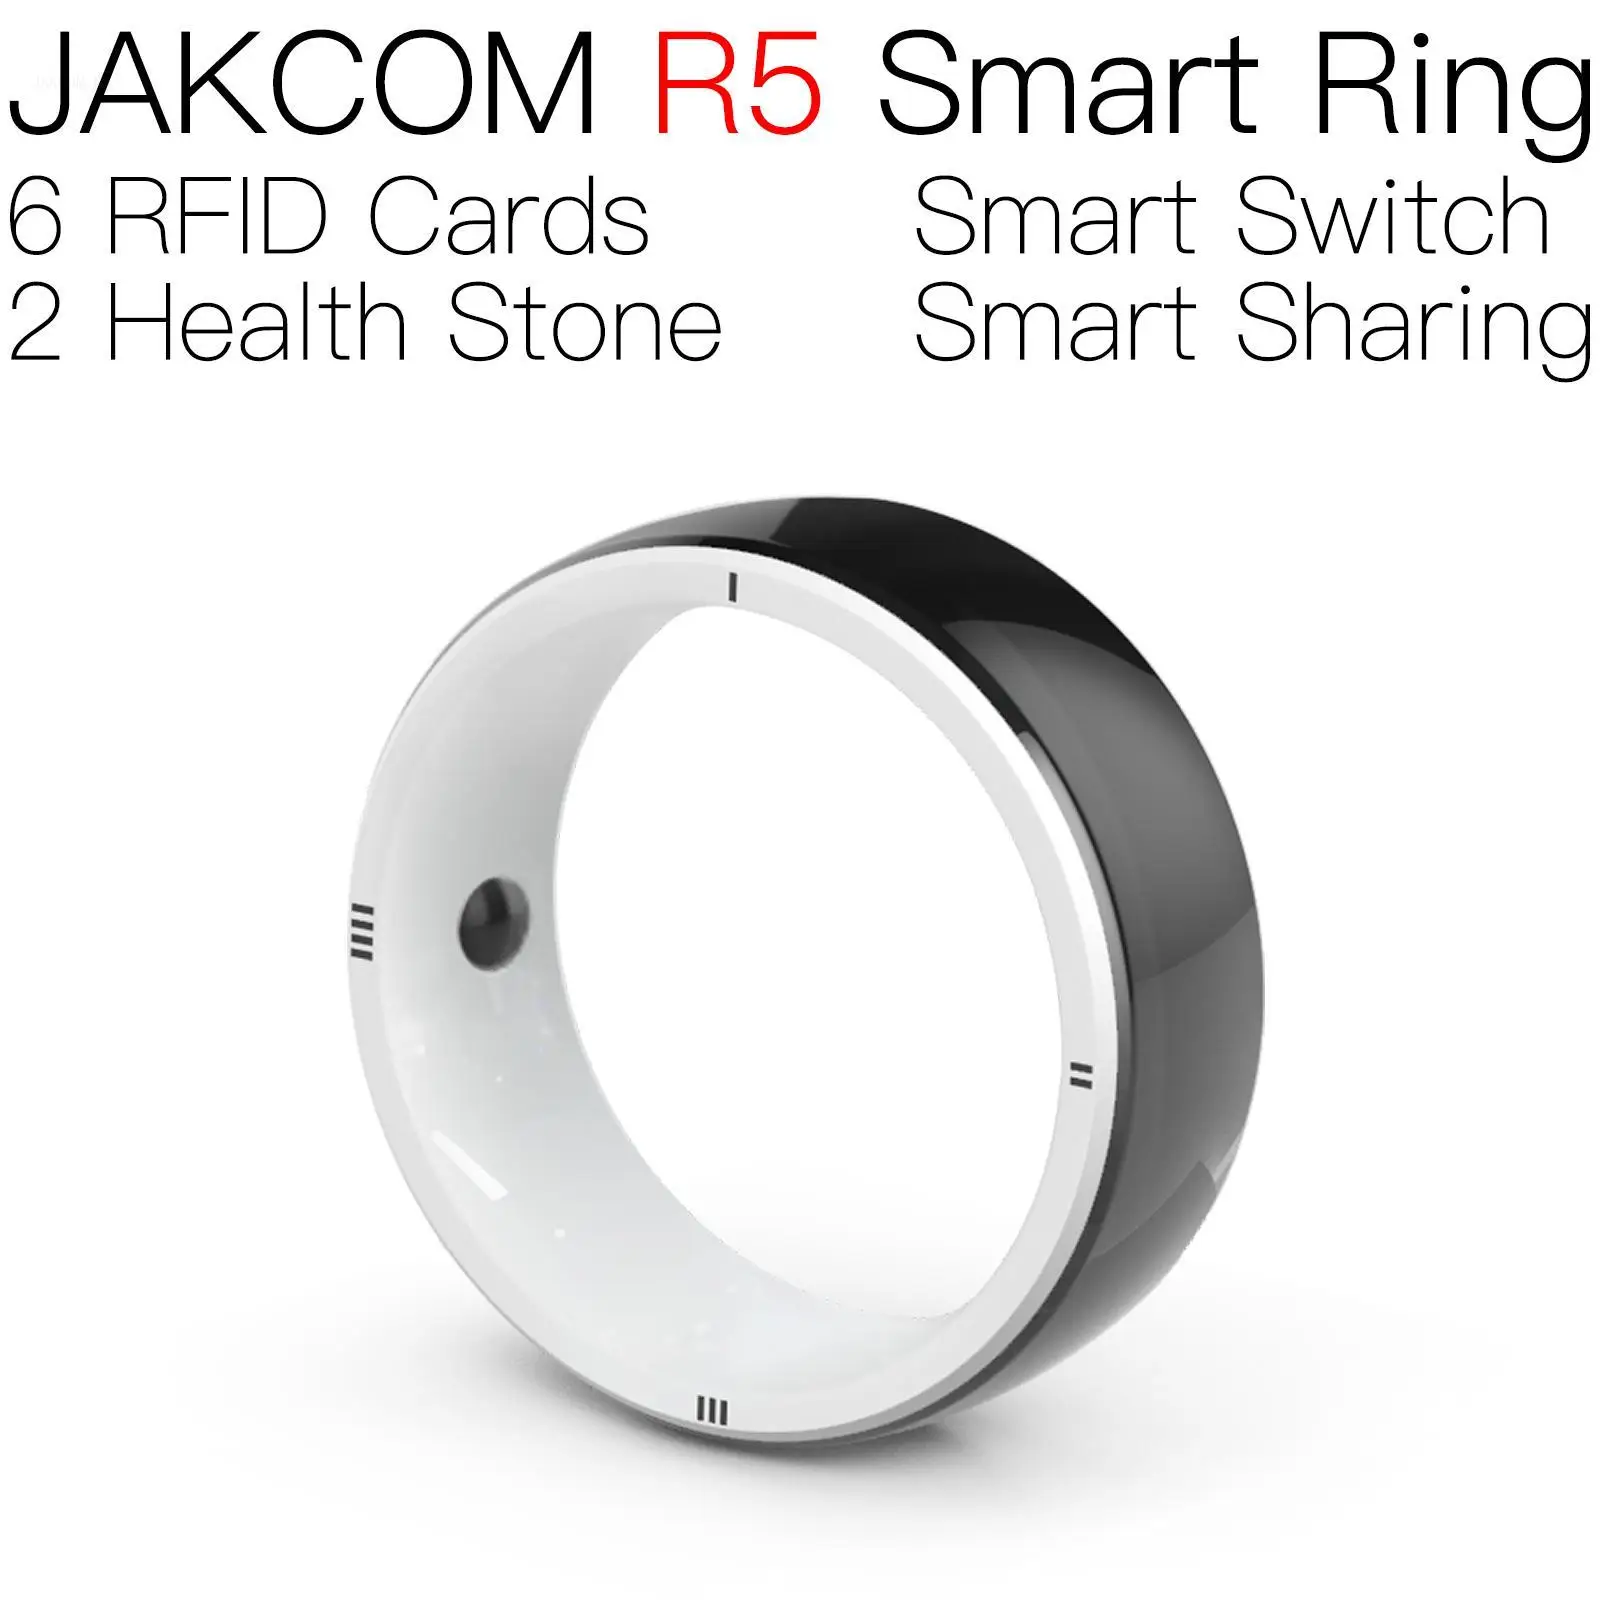 

JAKCOM R5 Smart Ring better than rfid mhz coil magnit black dual frequency card chip reader tag vhf arials minimoto cross